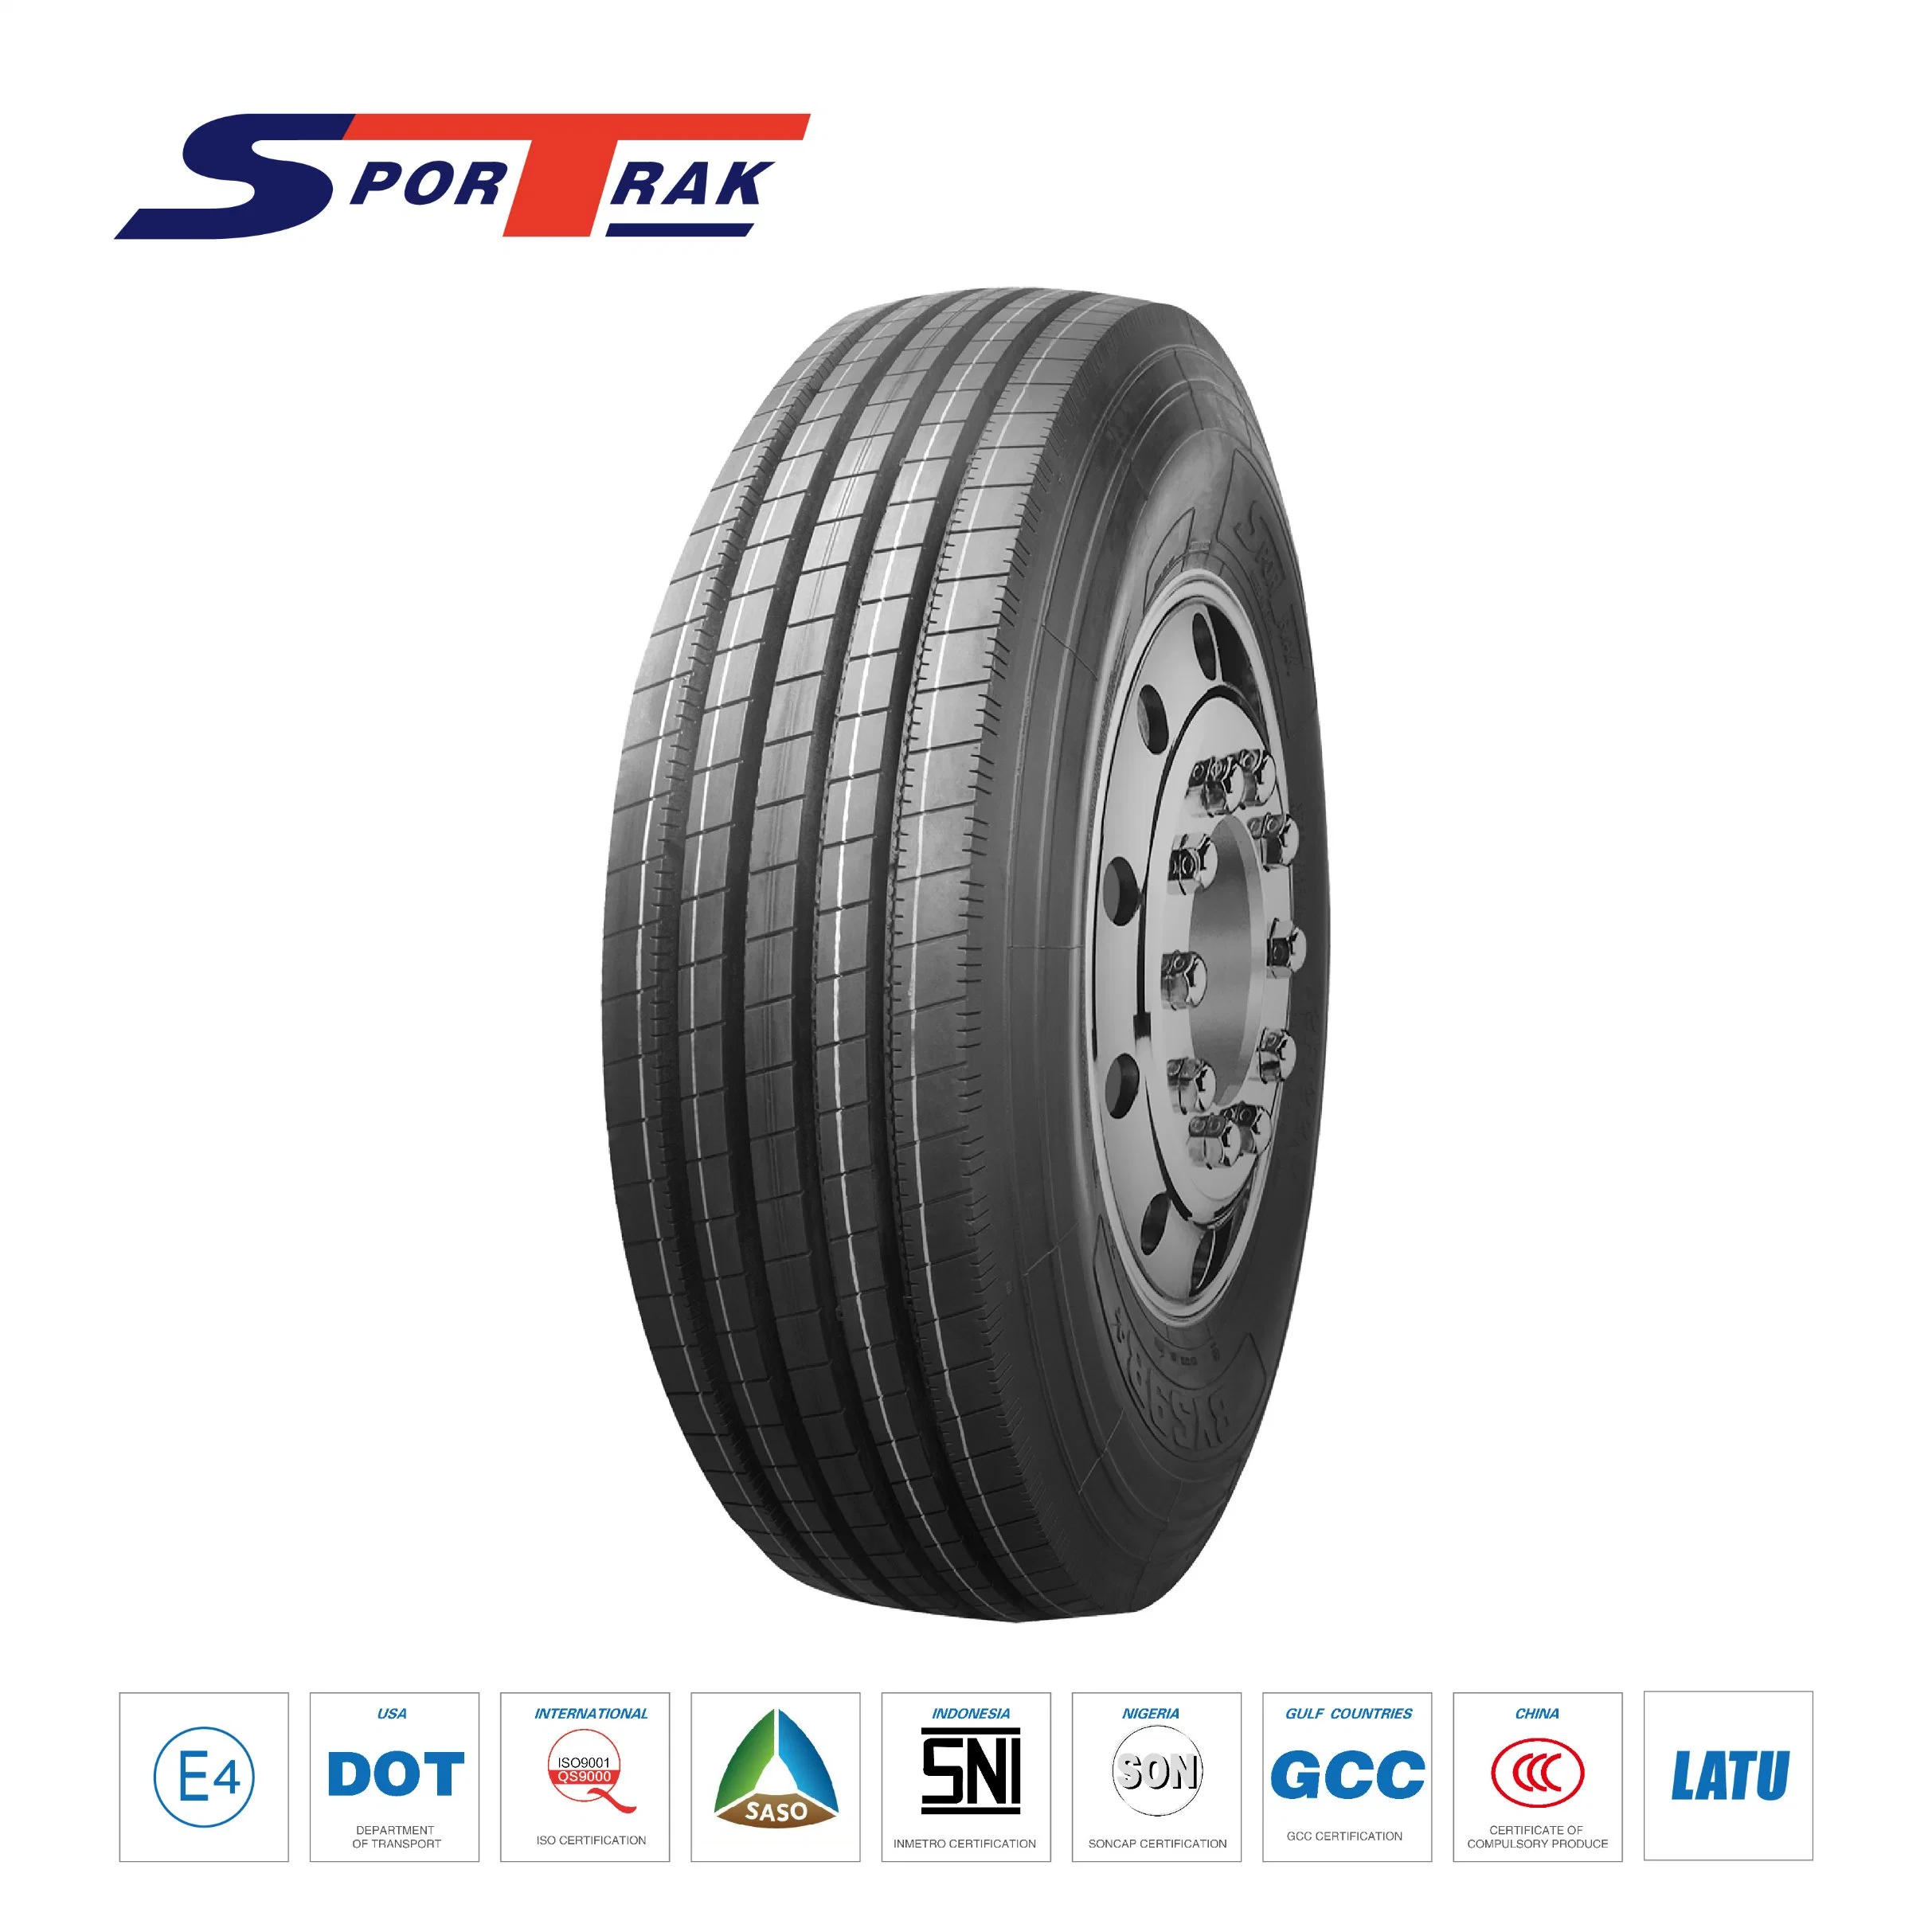 Hot Sell 12r25 All Steel Radial Truck Tires, Bus Tires, TBR Tires, Radial Tyre 11r22.5 12r225, 315/80r22.5